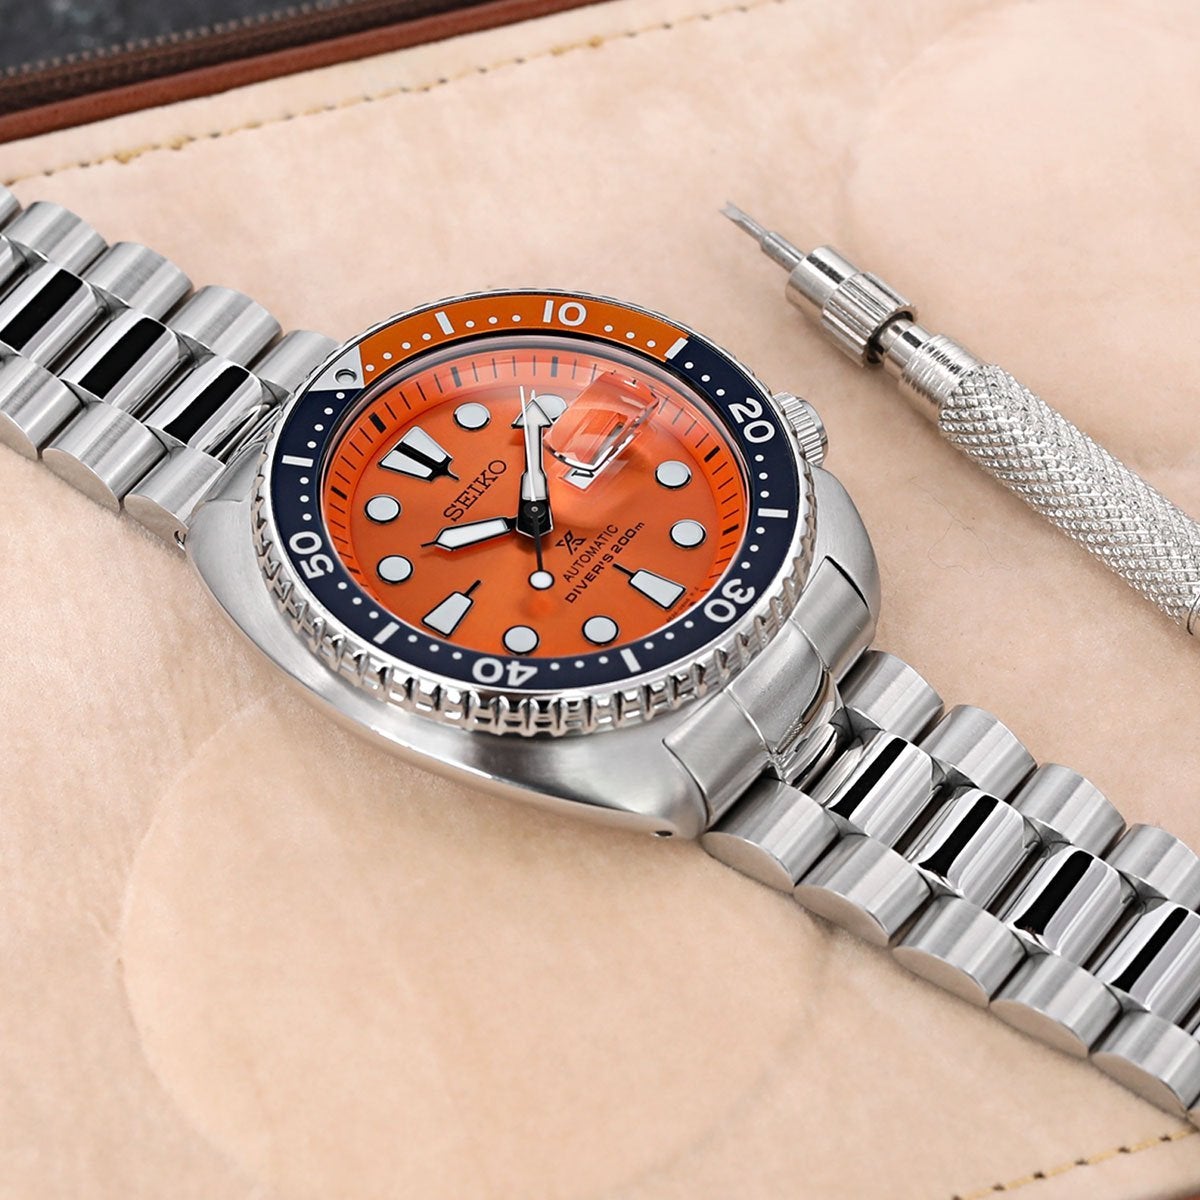 Seiko Prospex SRPC95K1 Divers Watch Limited Edition Orange New Turtle 200m Strapcode Watch Bands